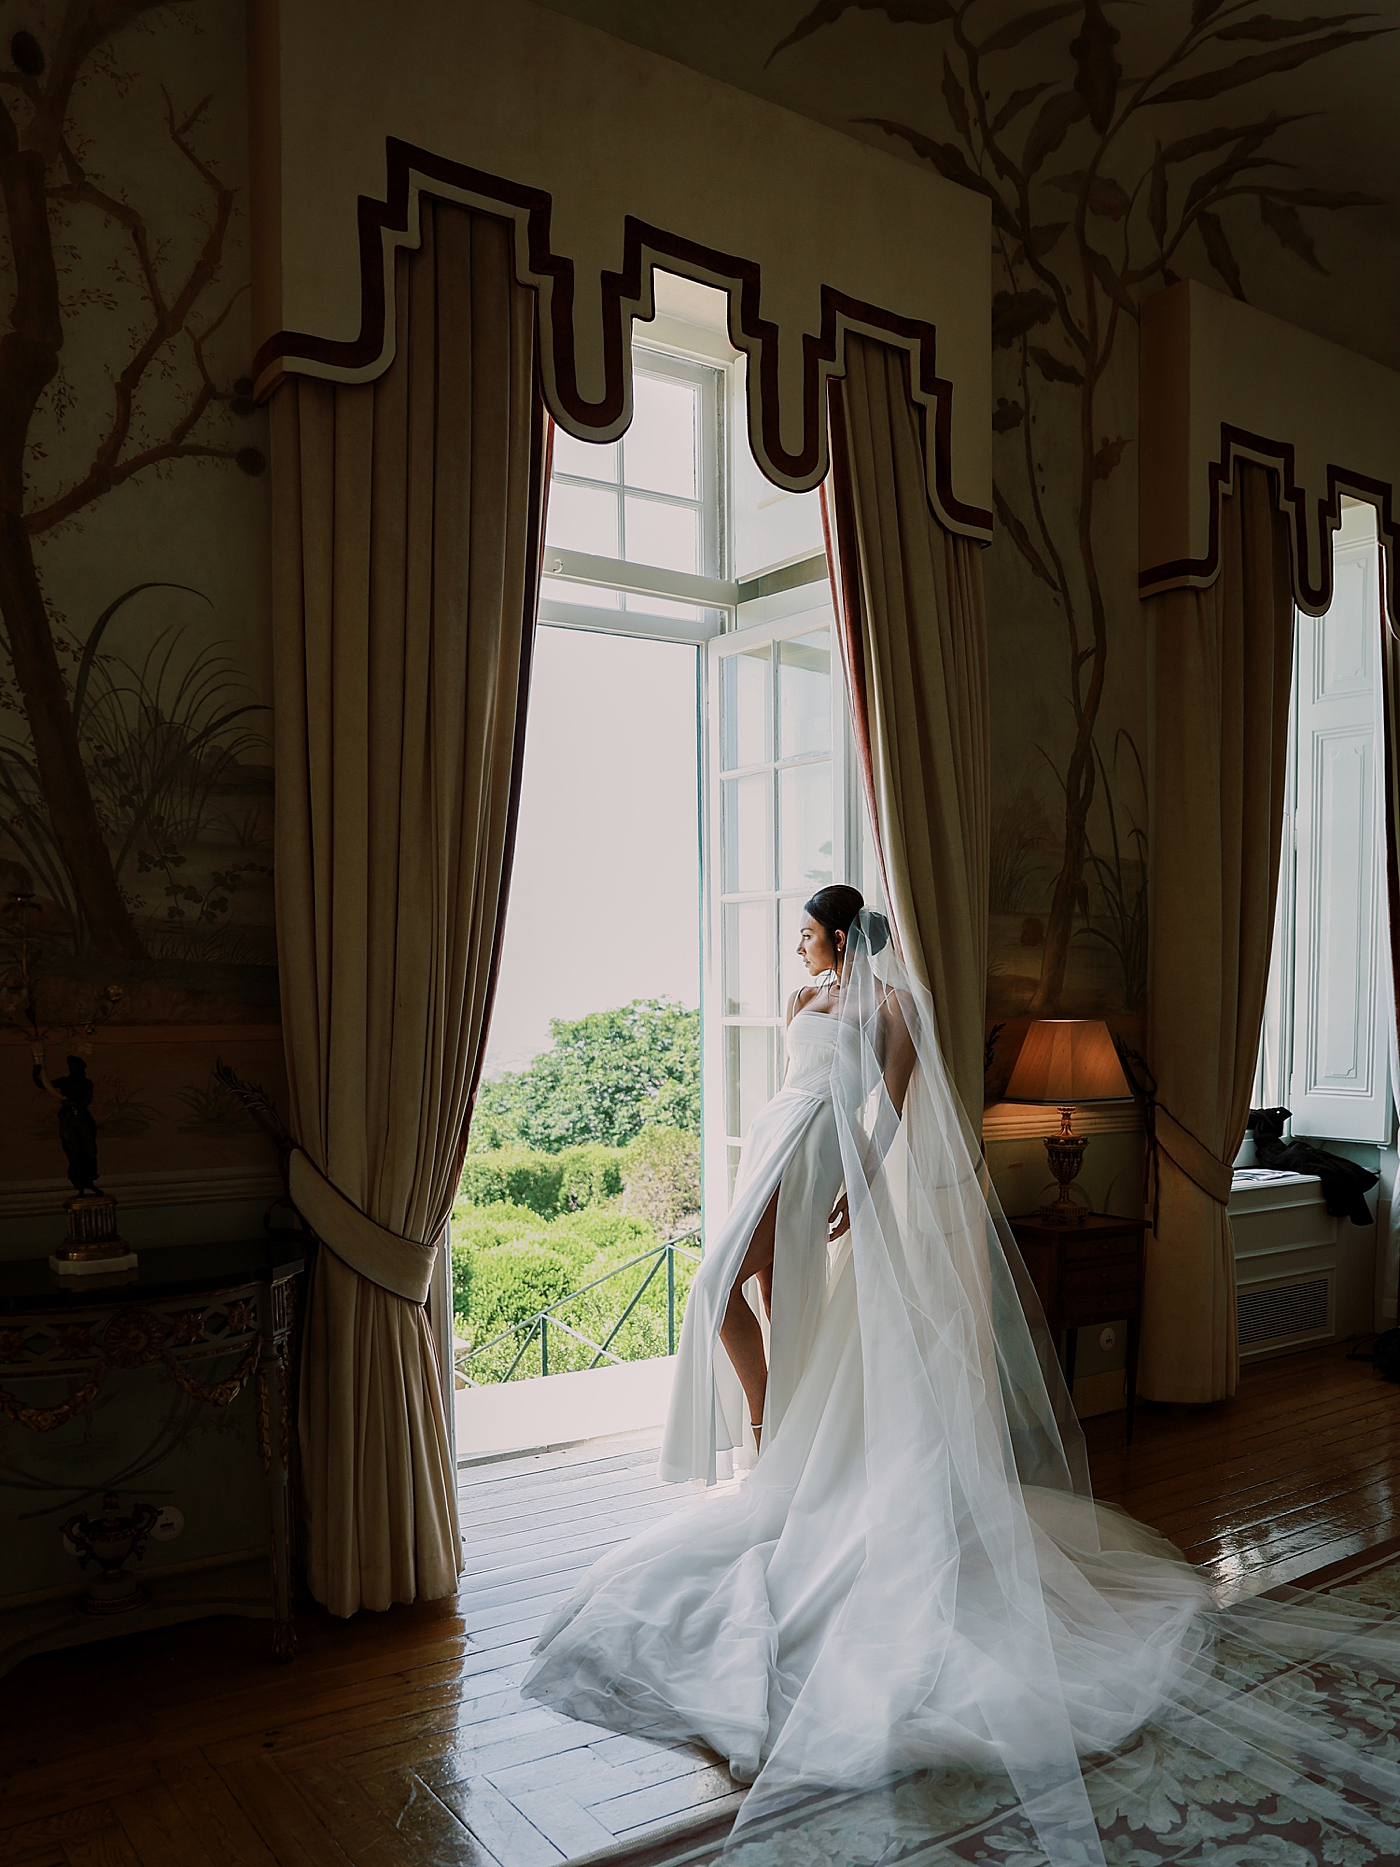 Bride standing by a window | Image by Diane Sotero Photography